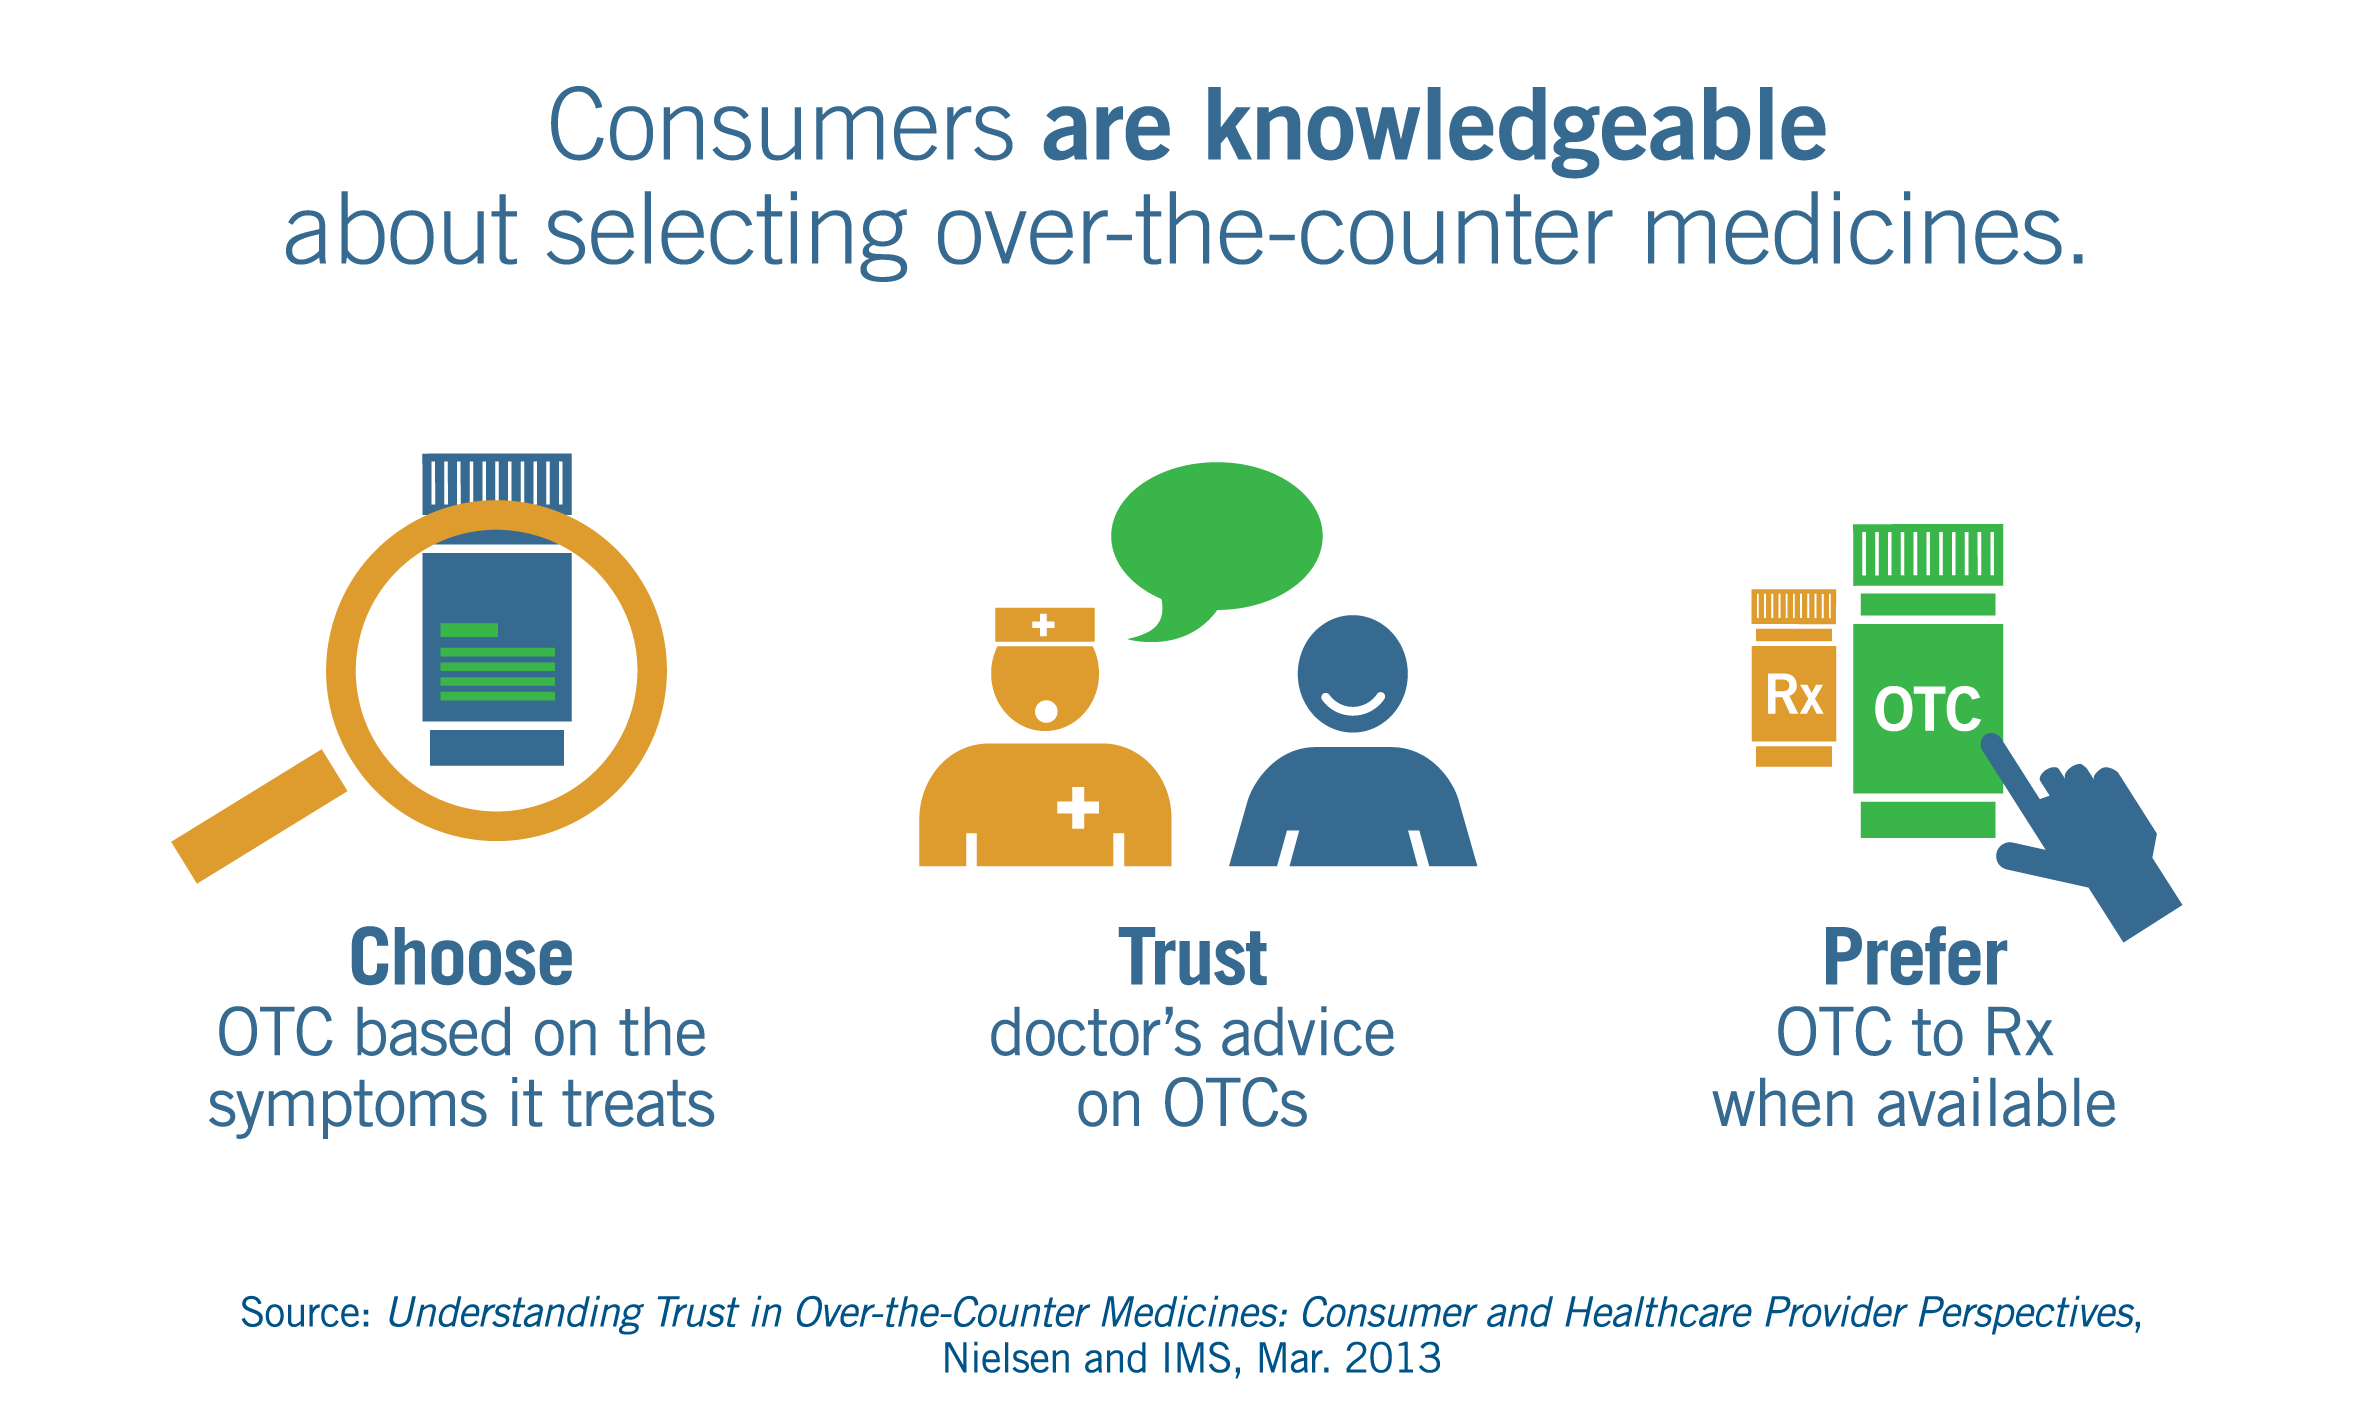 infographic showing that consumers are knowledgeable about selecting otc medicines